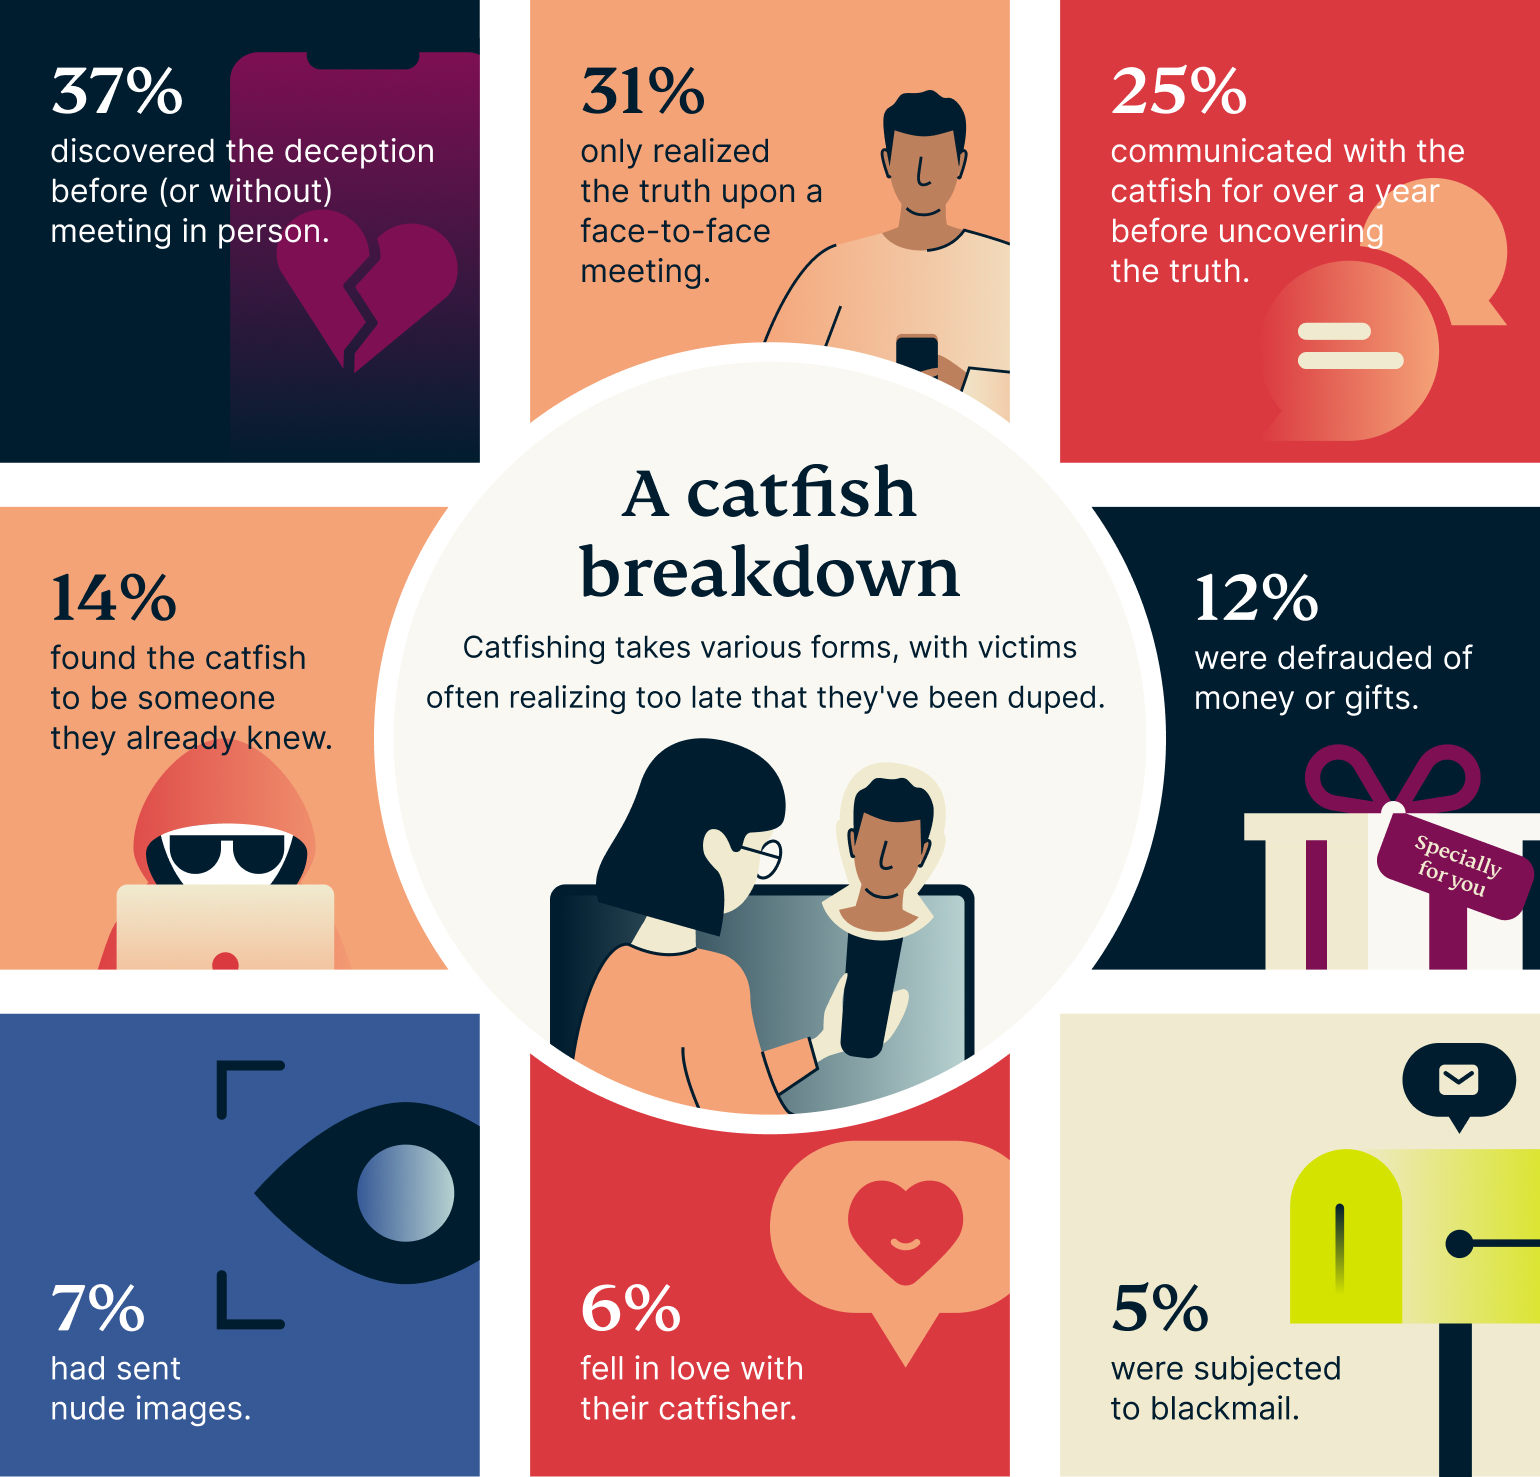 Taking the Bait: Almost a Quarter of Brits have been Catfished, Leading to Emotional Devastation and Financial Loss